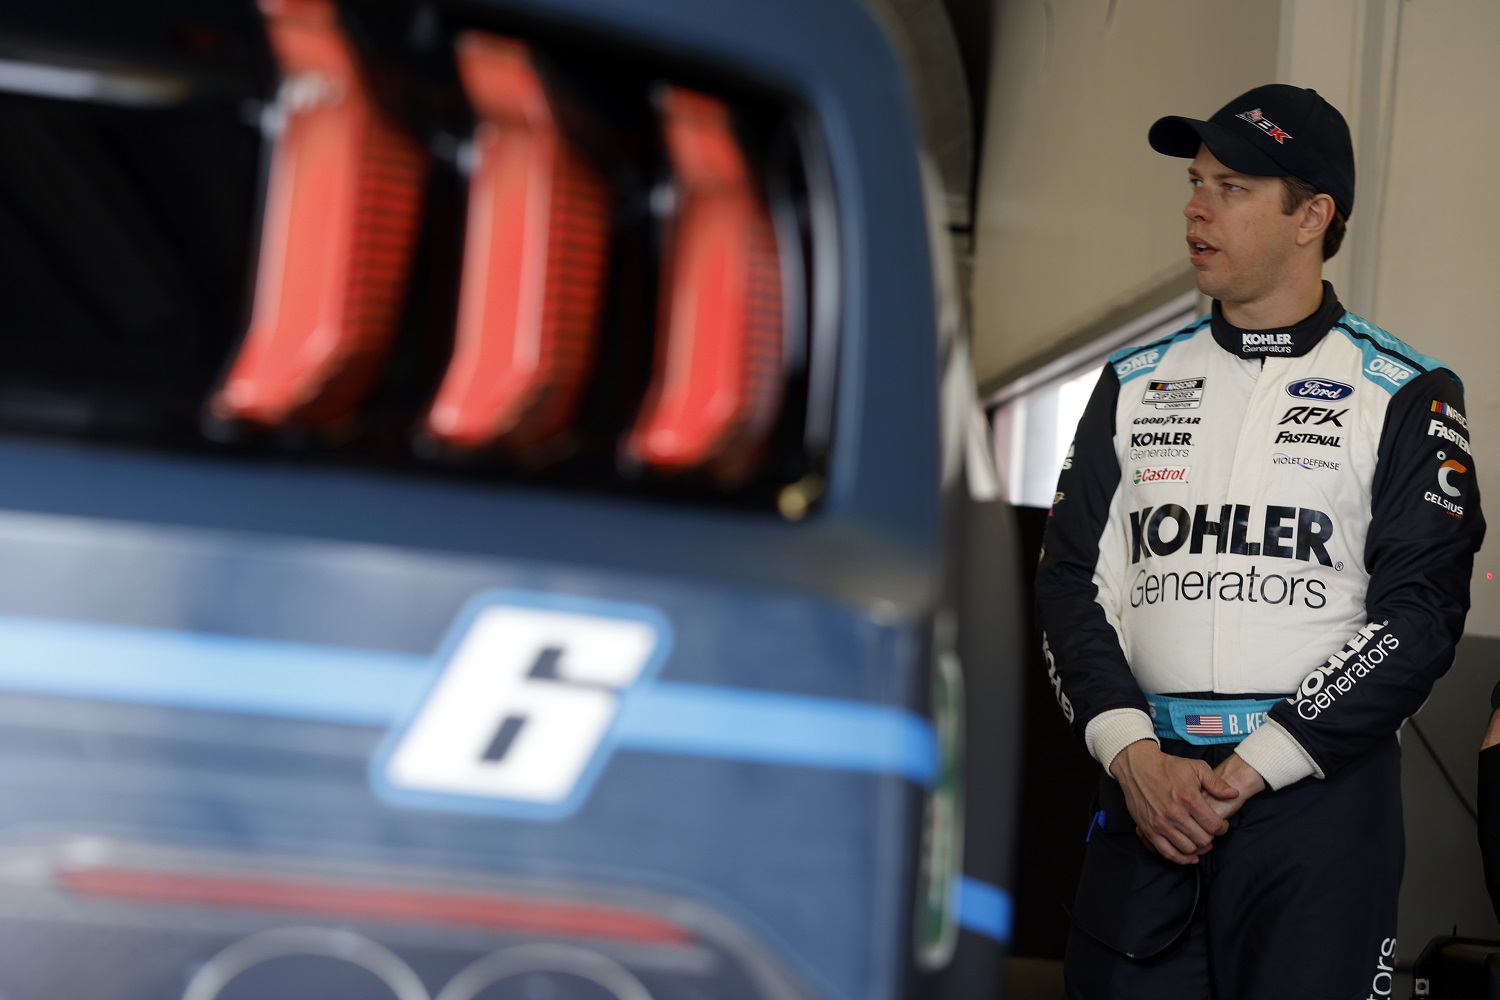 Brad Keselowski stands in the garage area during practice for the NASCAR Cup Series Daytona 500 at Daytona International Speedway on Feb. 15, 2022.